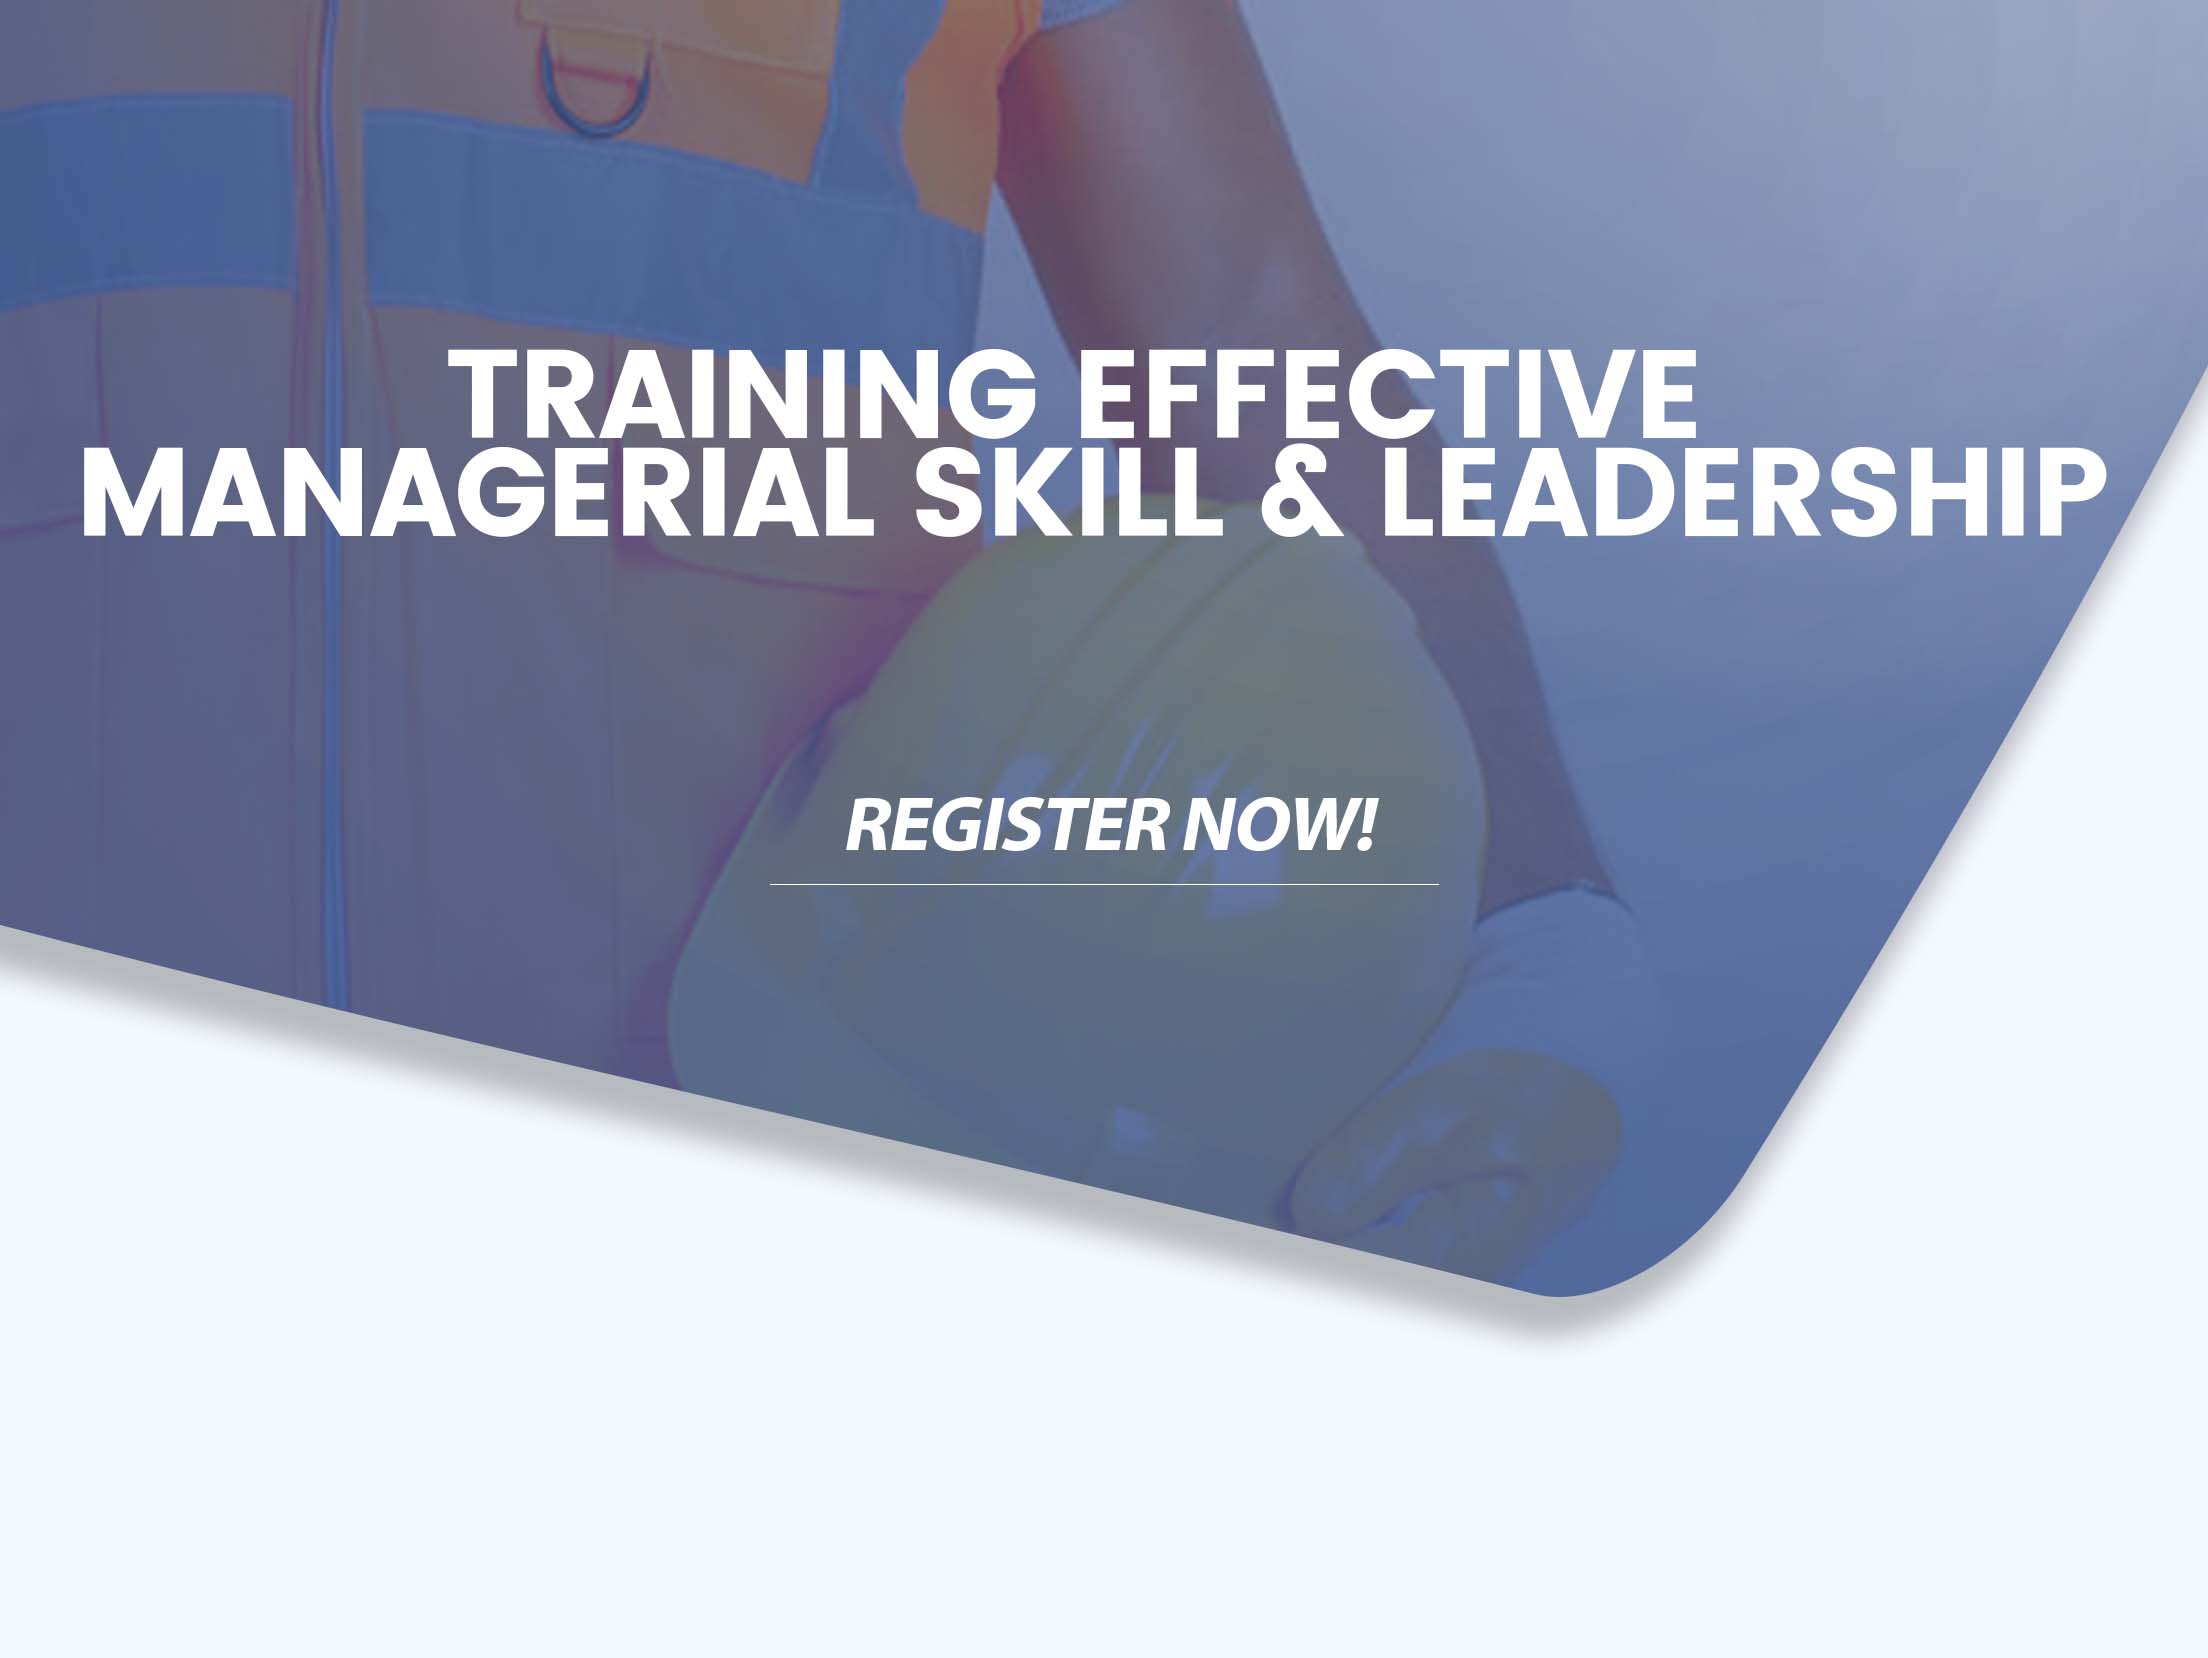 Training Effective Managerial Skill & Leadership